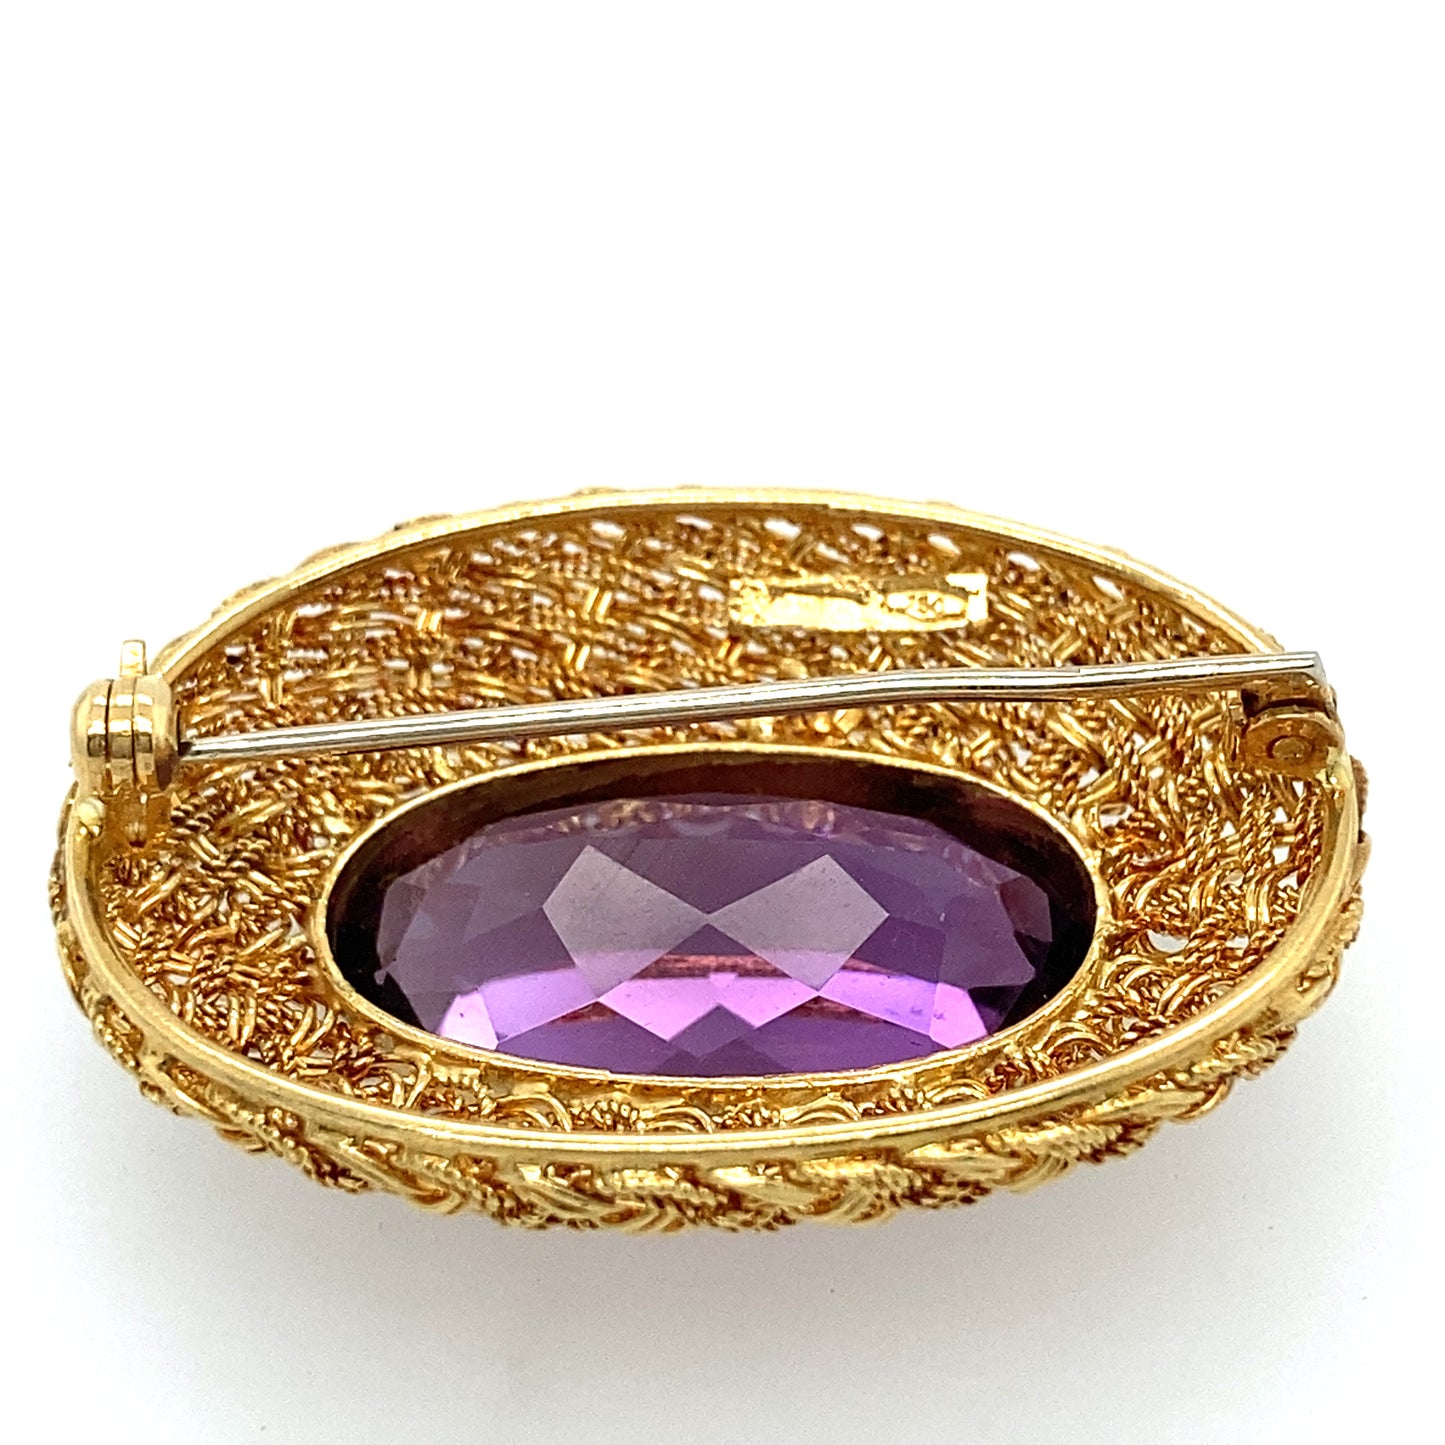 18k yellow gold pin and pendant with  a dark purple color Amethyst stone.